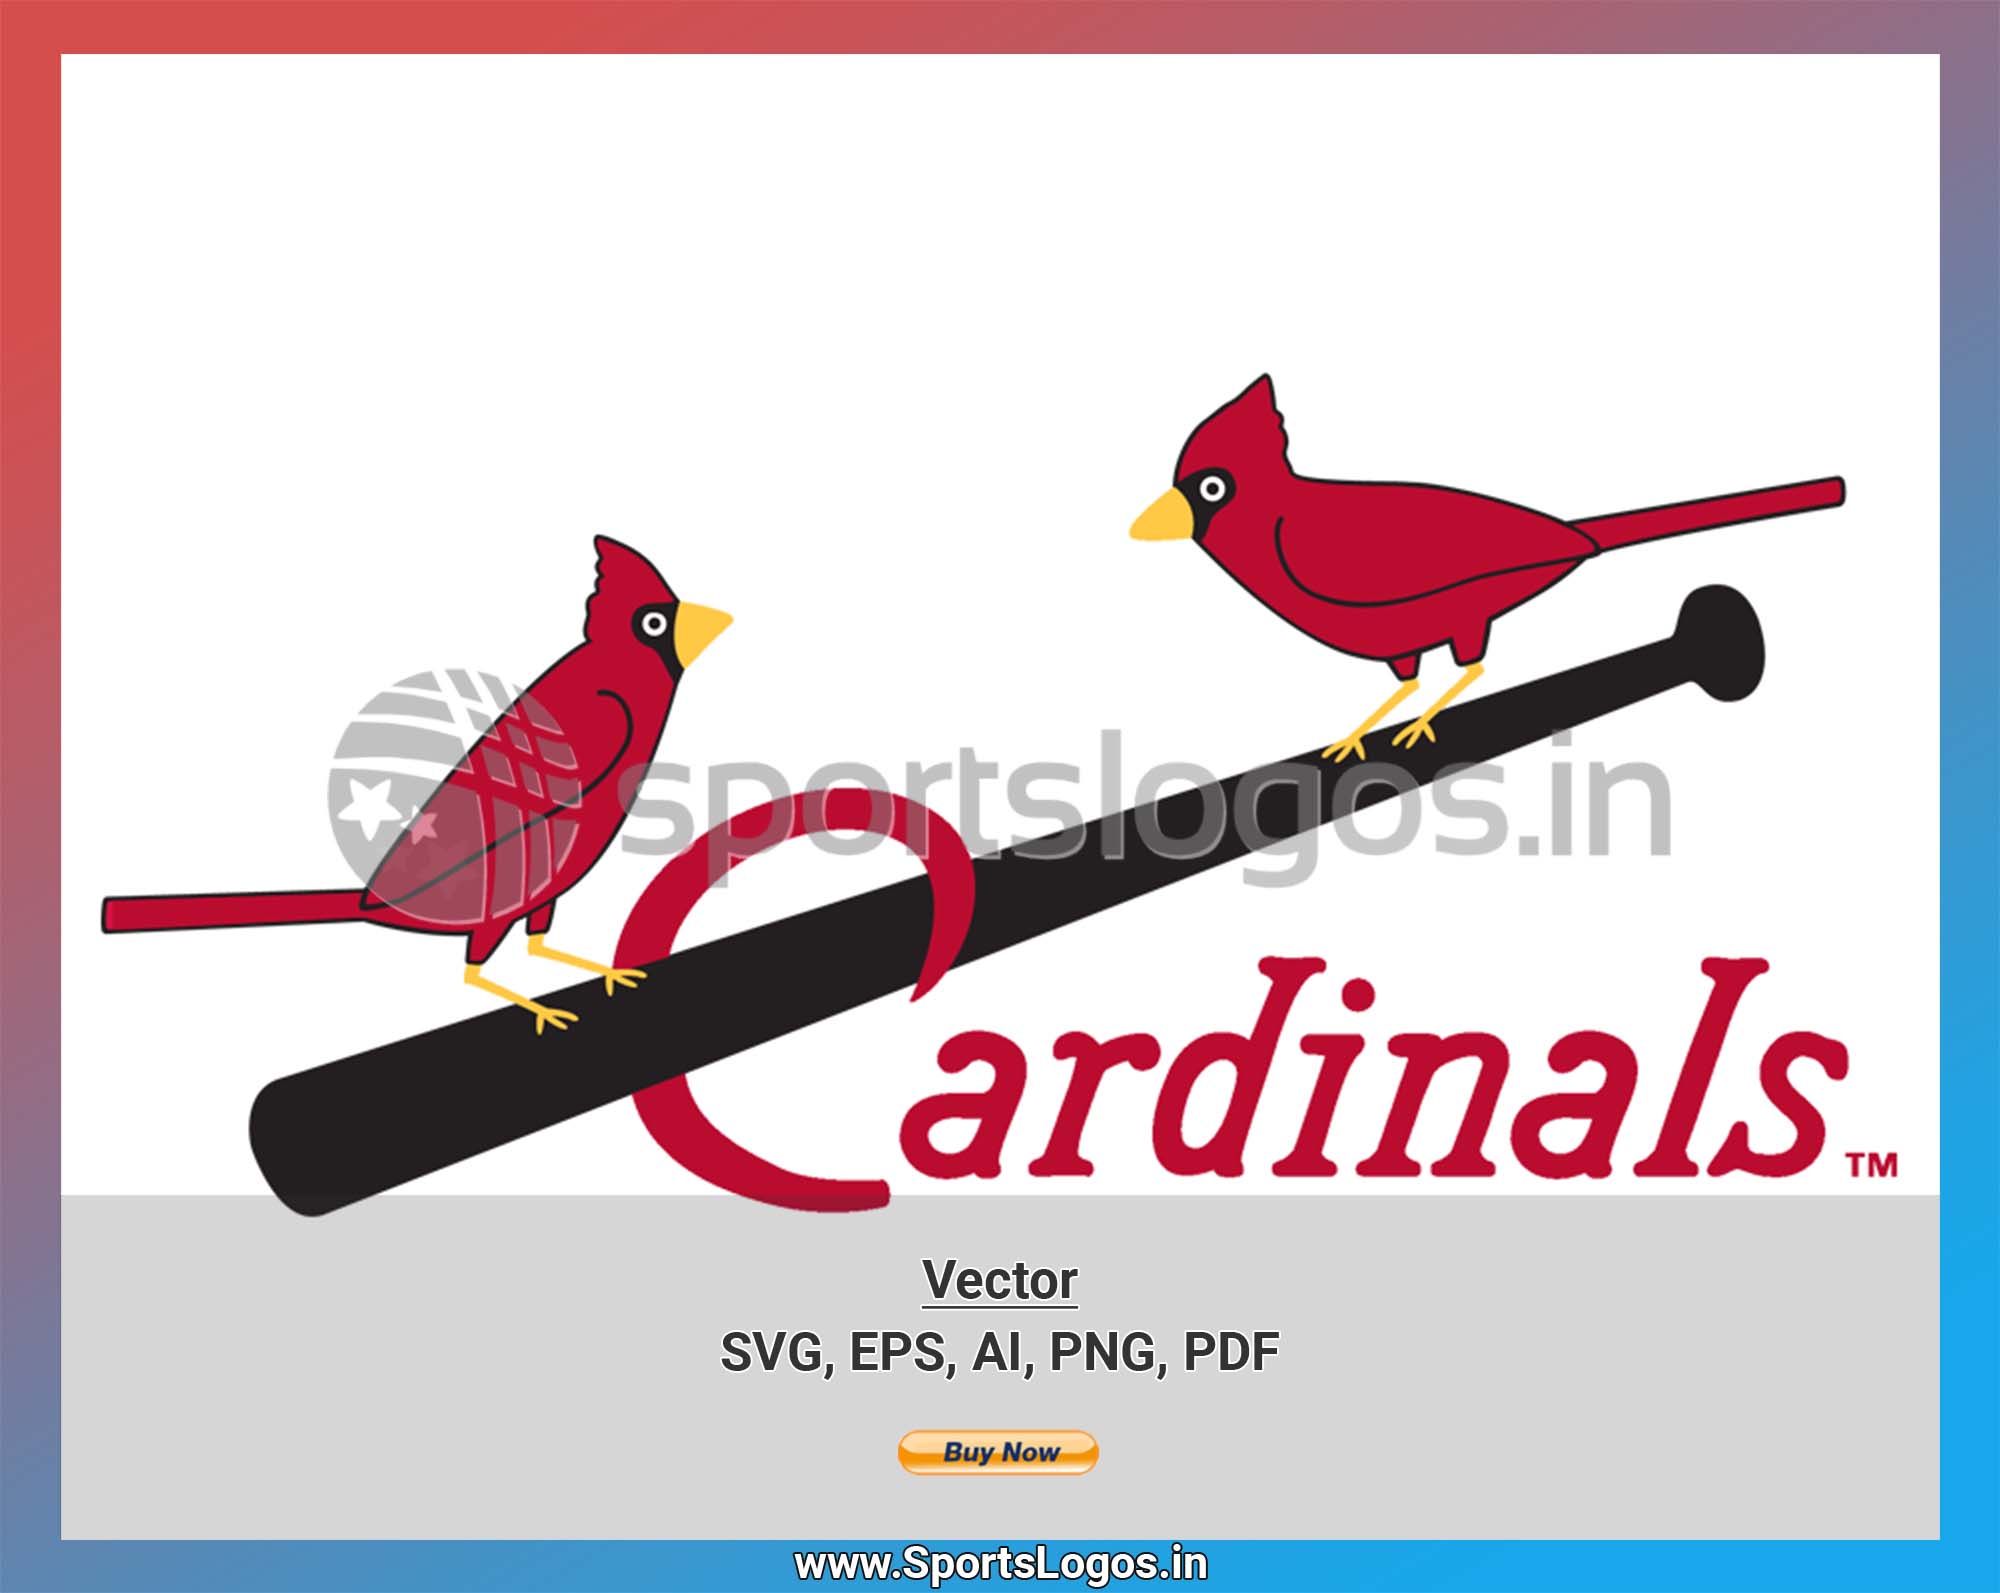 St. Louis Cardinals - Baseball Sports Vector SVG Logo in 5 formats -  SPLN004191 • Sports Logos - Embroidery & Vector for NFL, NBA, NHL, MLB,  MiLB, and more!